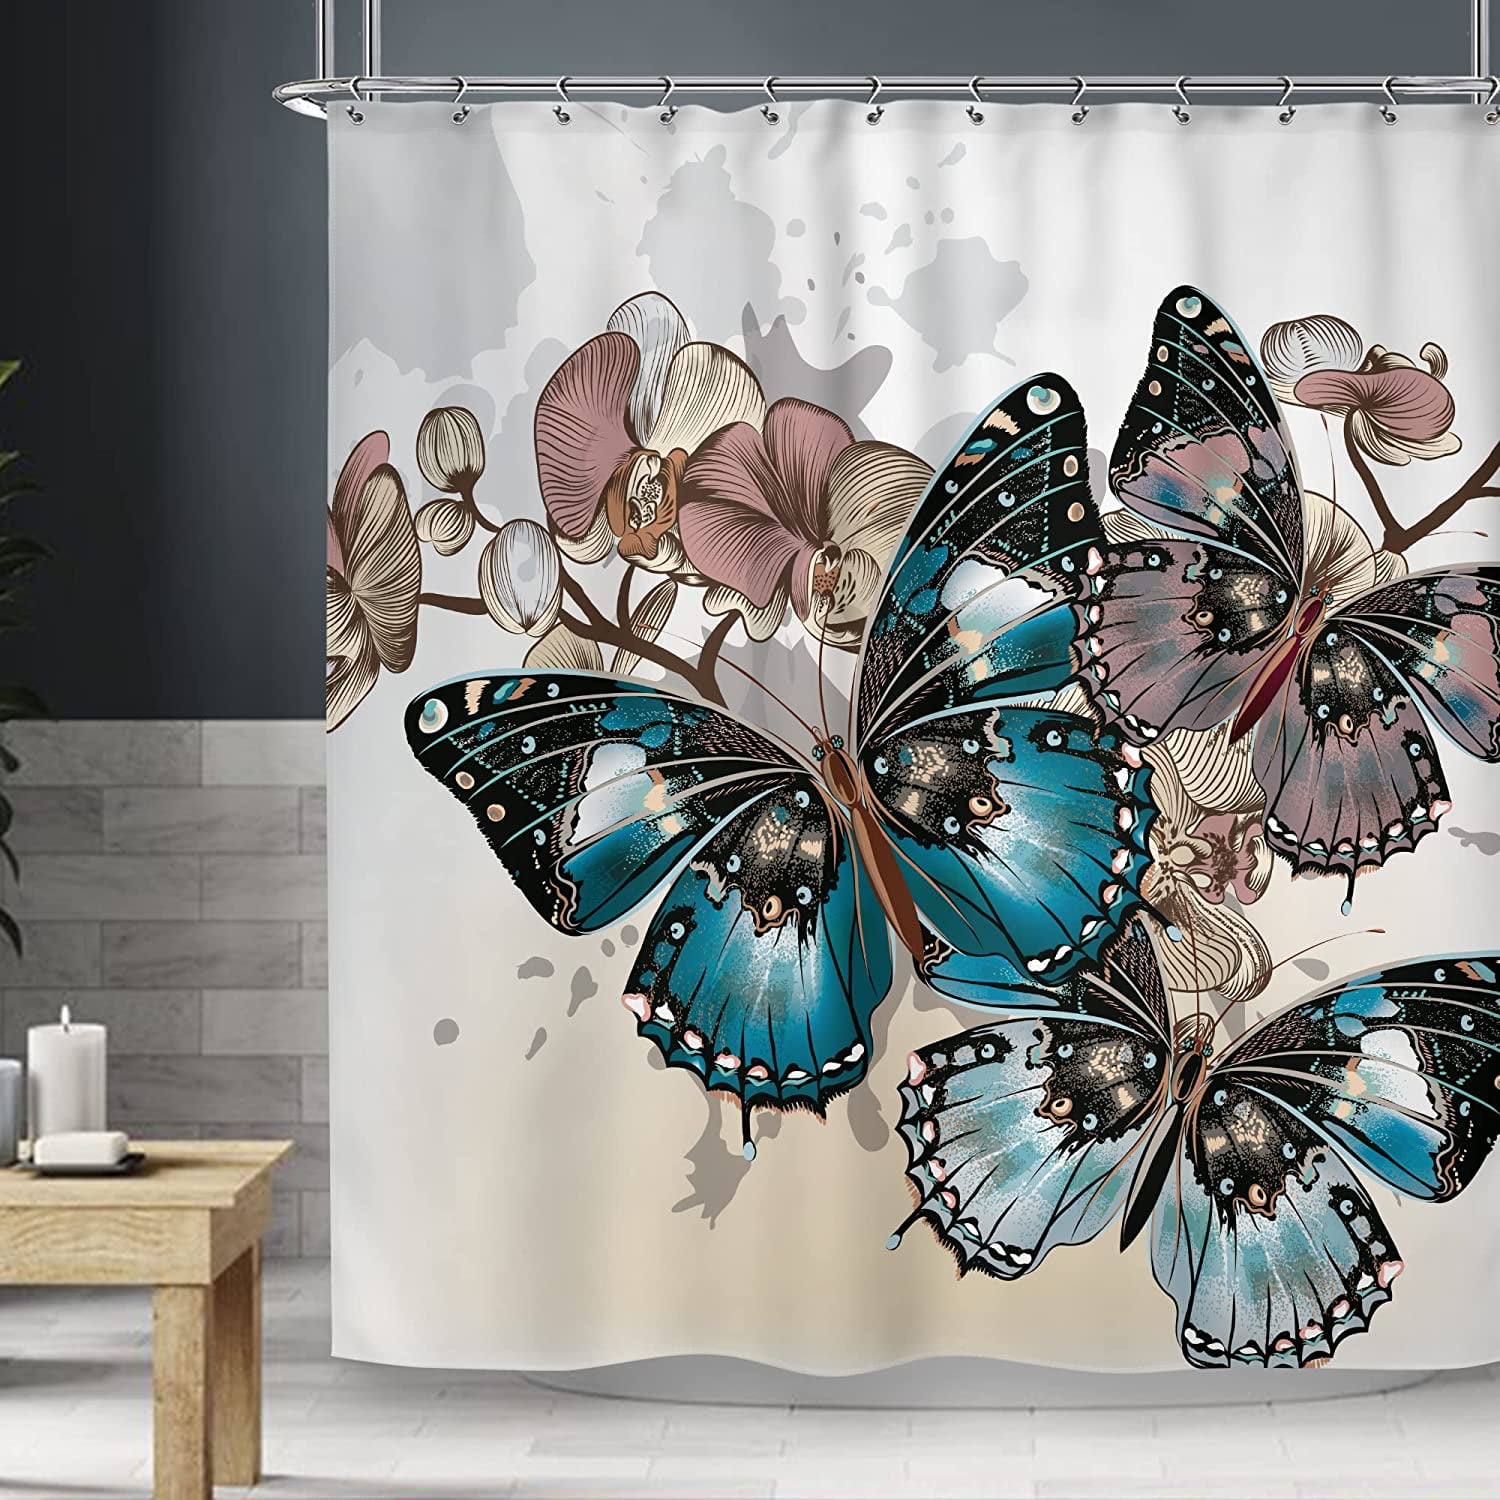 Fantasy Floral Flower With Butterfly Waterproof Polyester Fabric Shower Curtain 